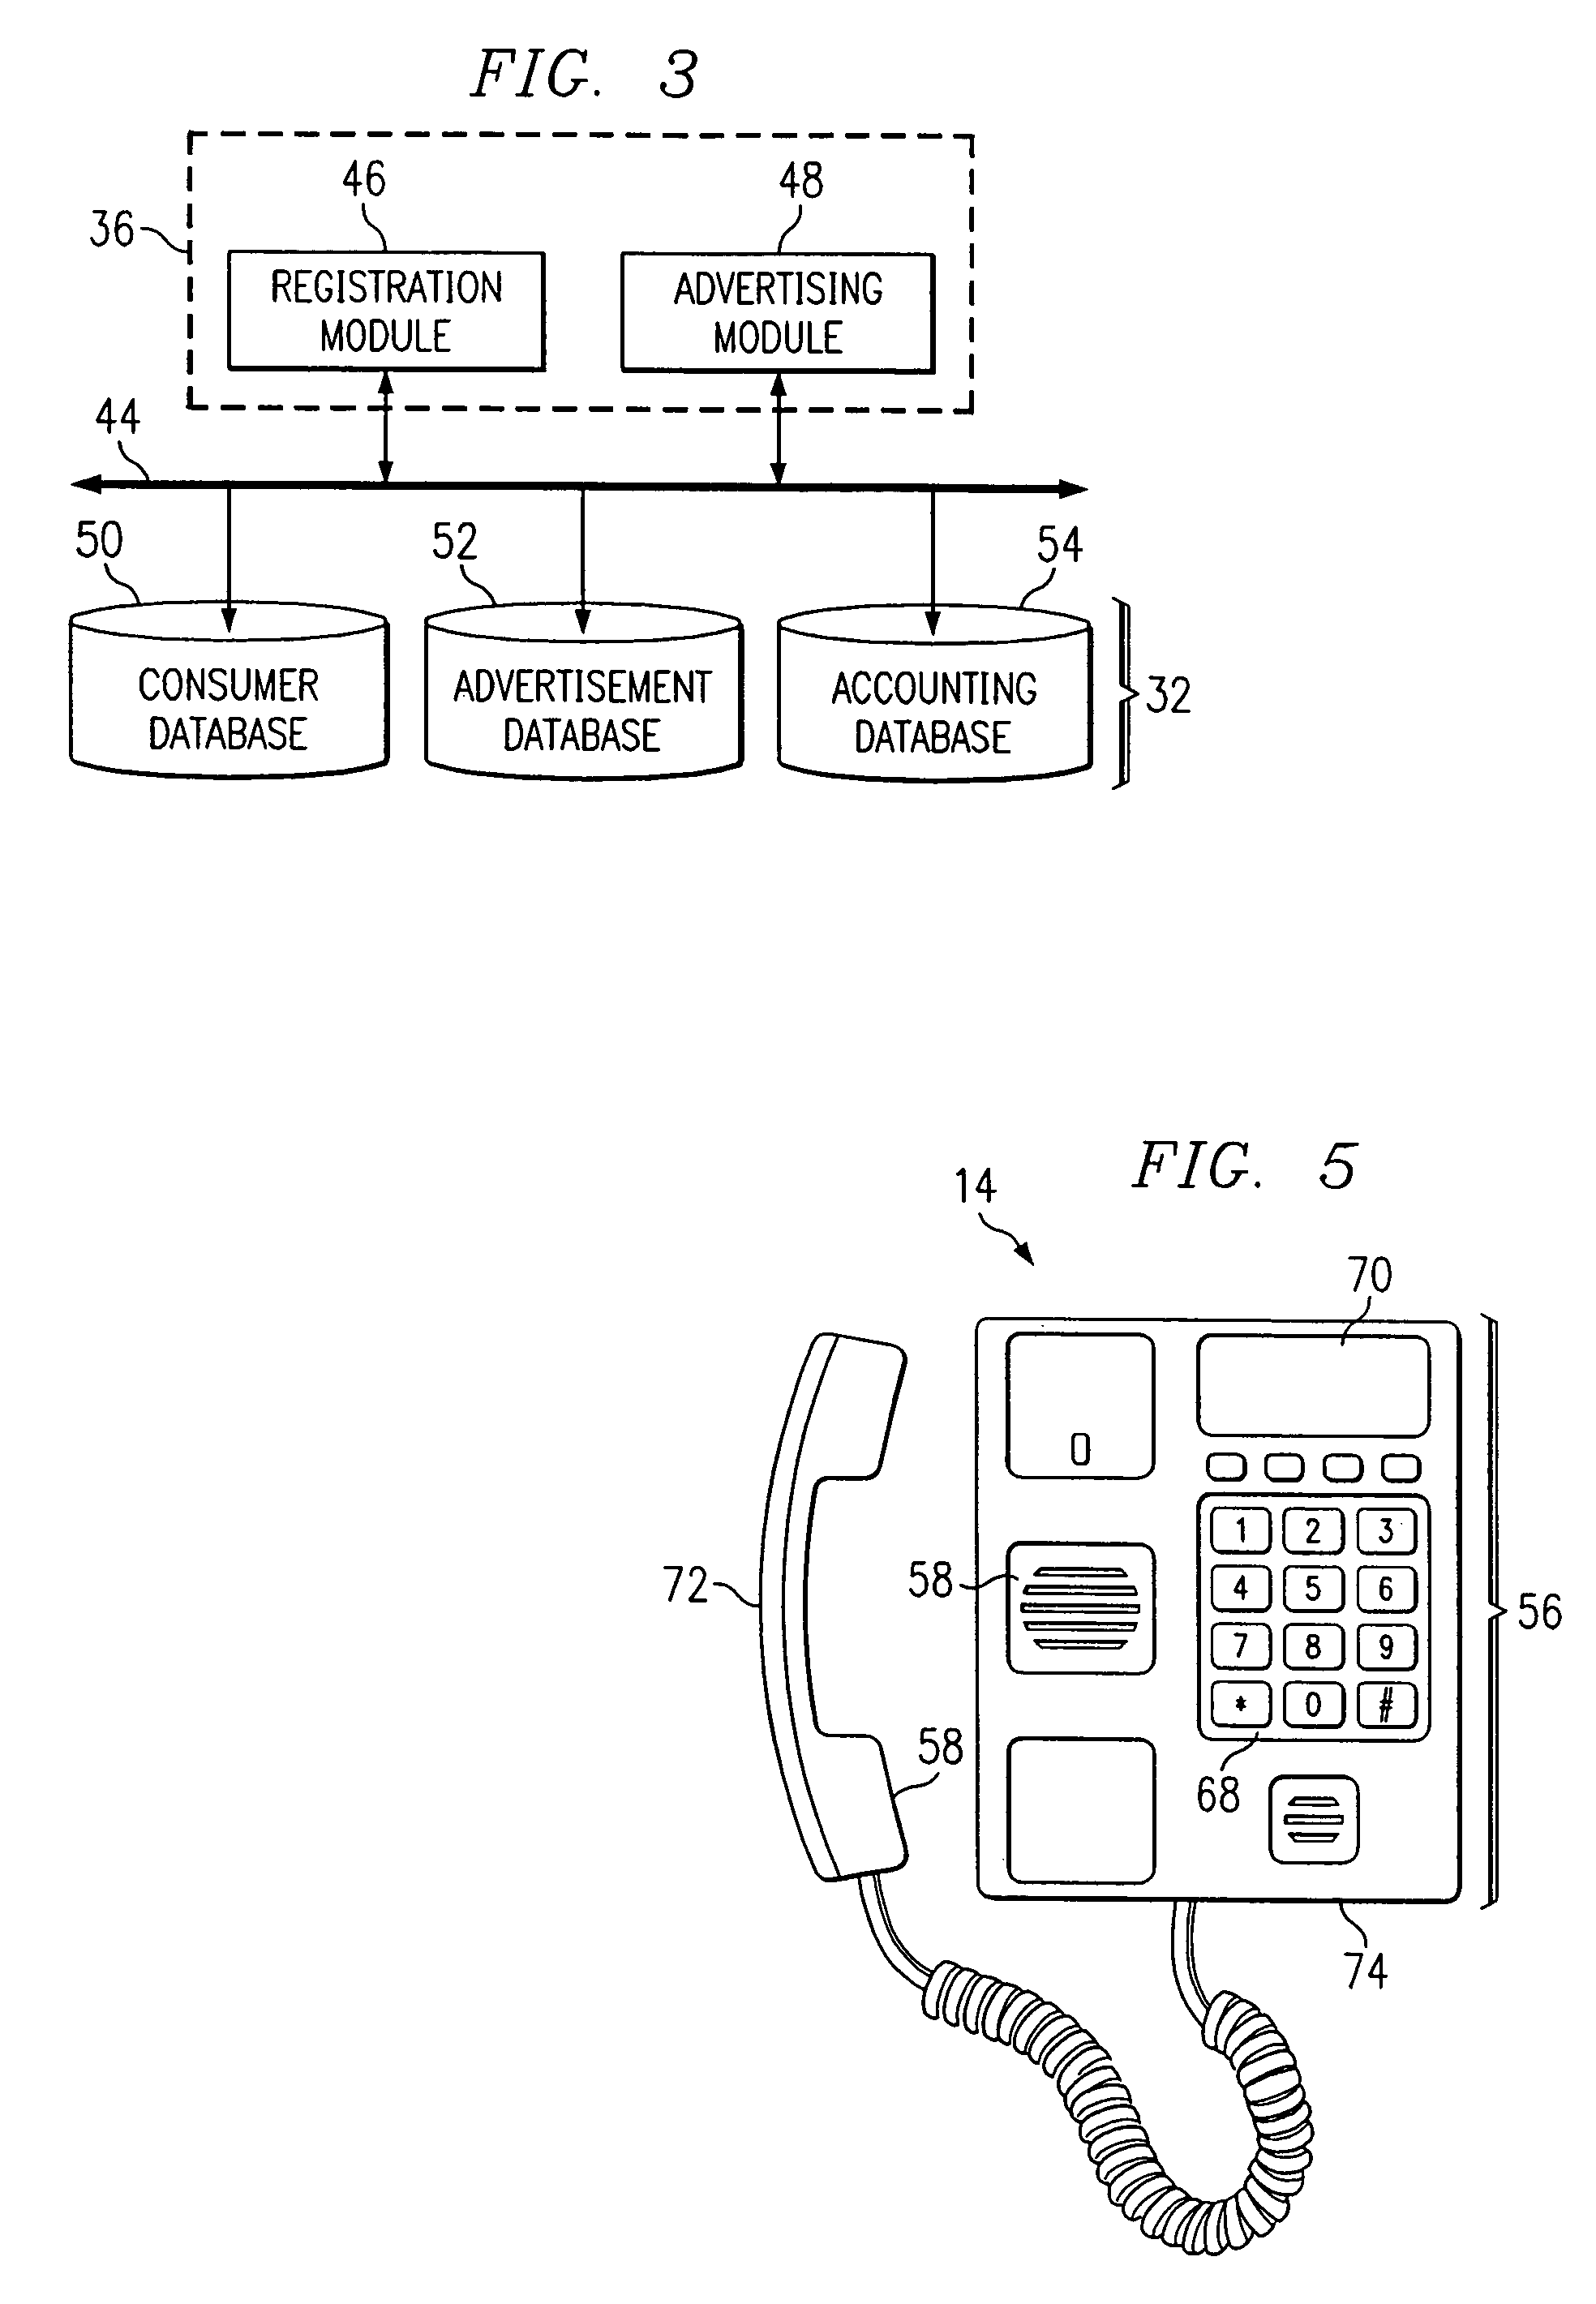 System and method for providing on-line advertising and information